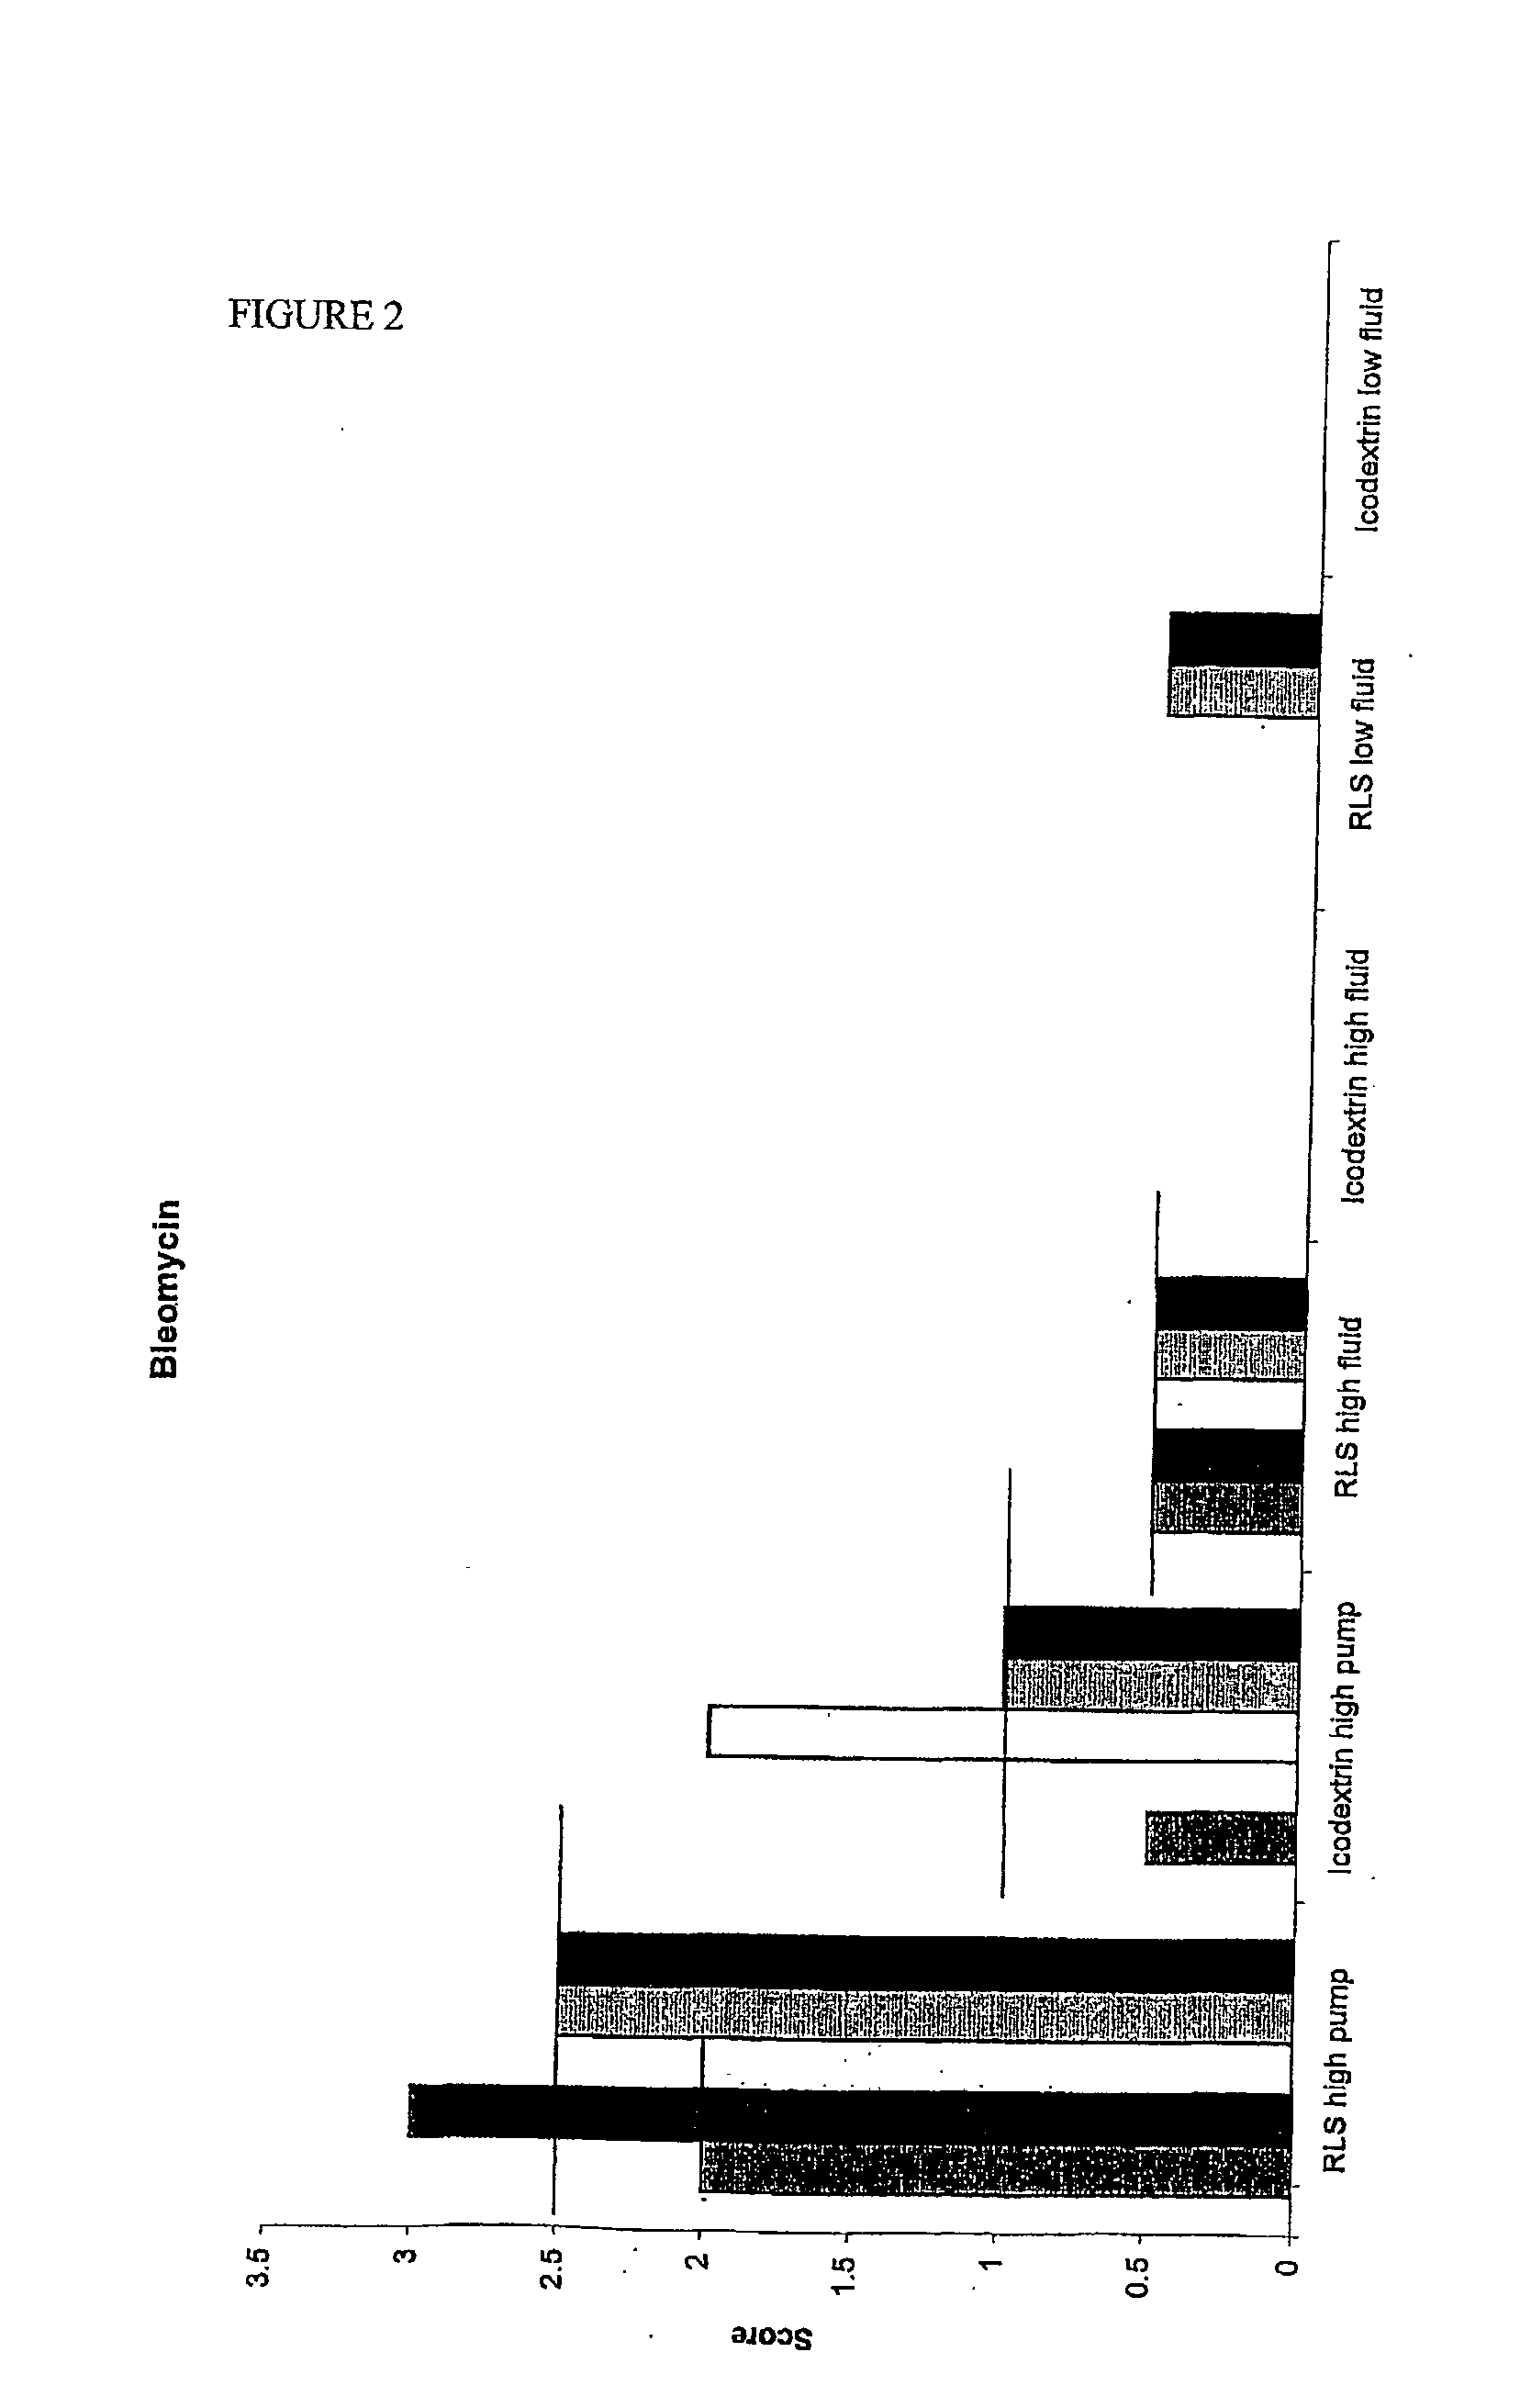 Dextrin containing compositions for prevention of adhesions